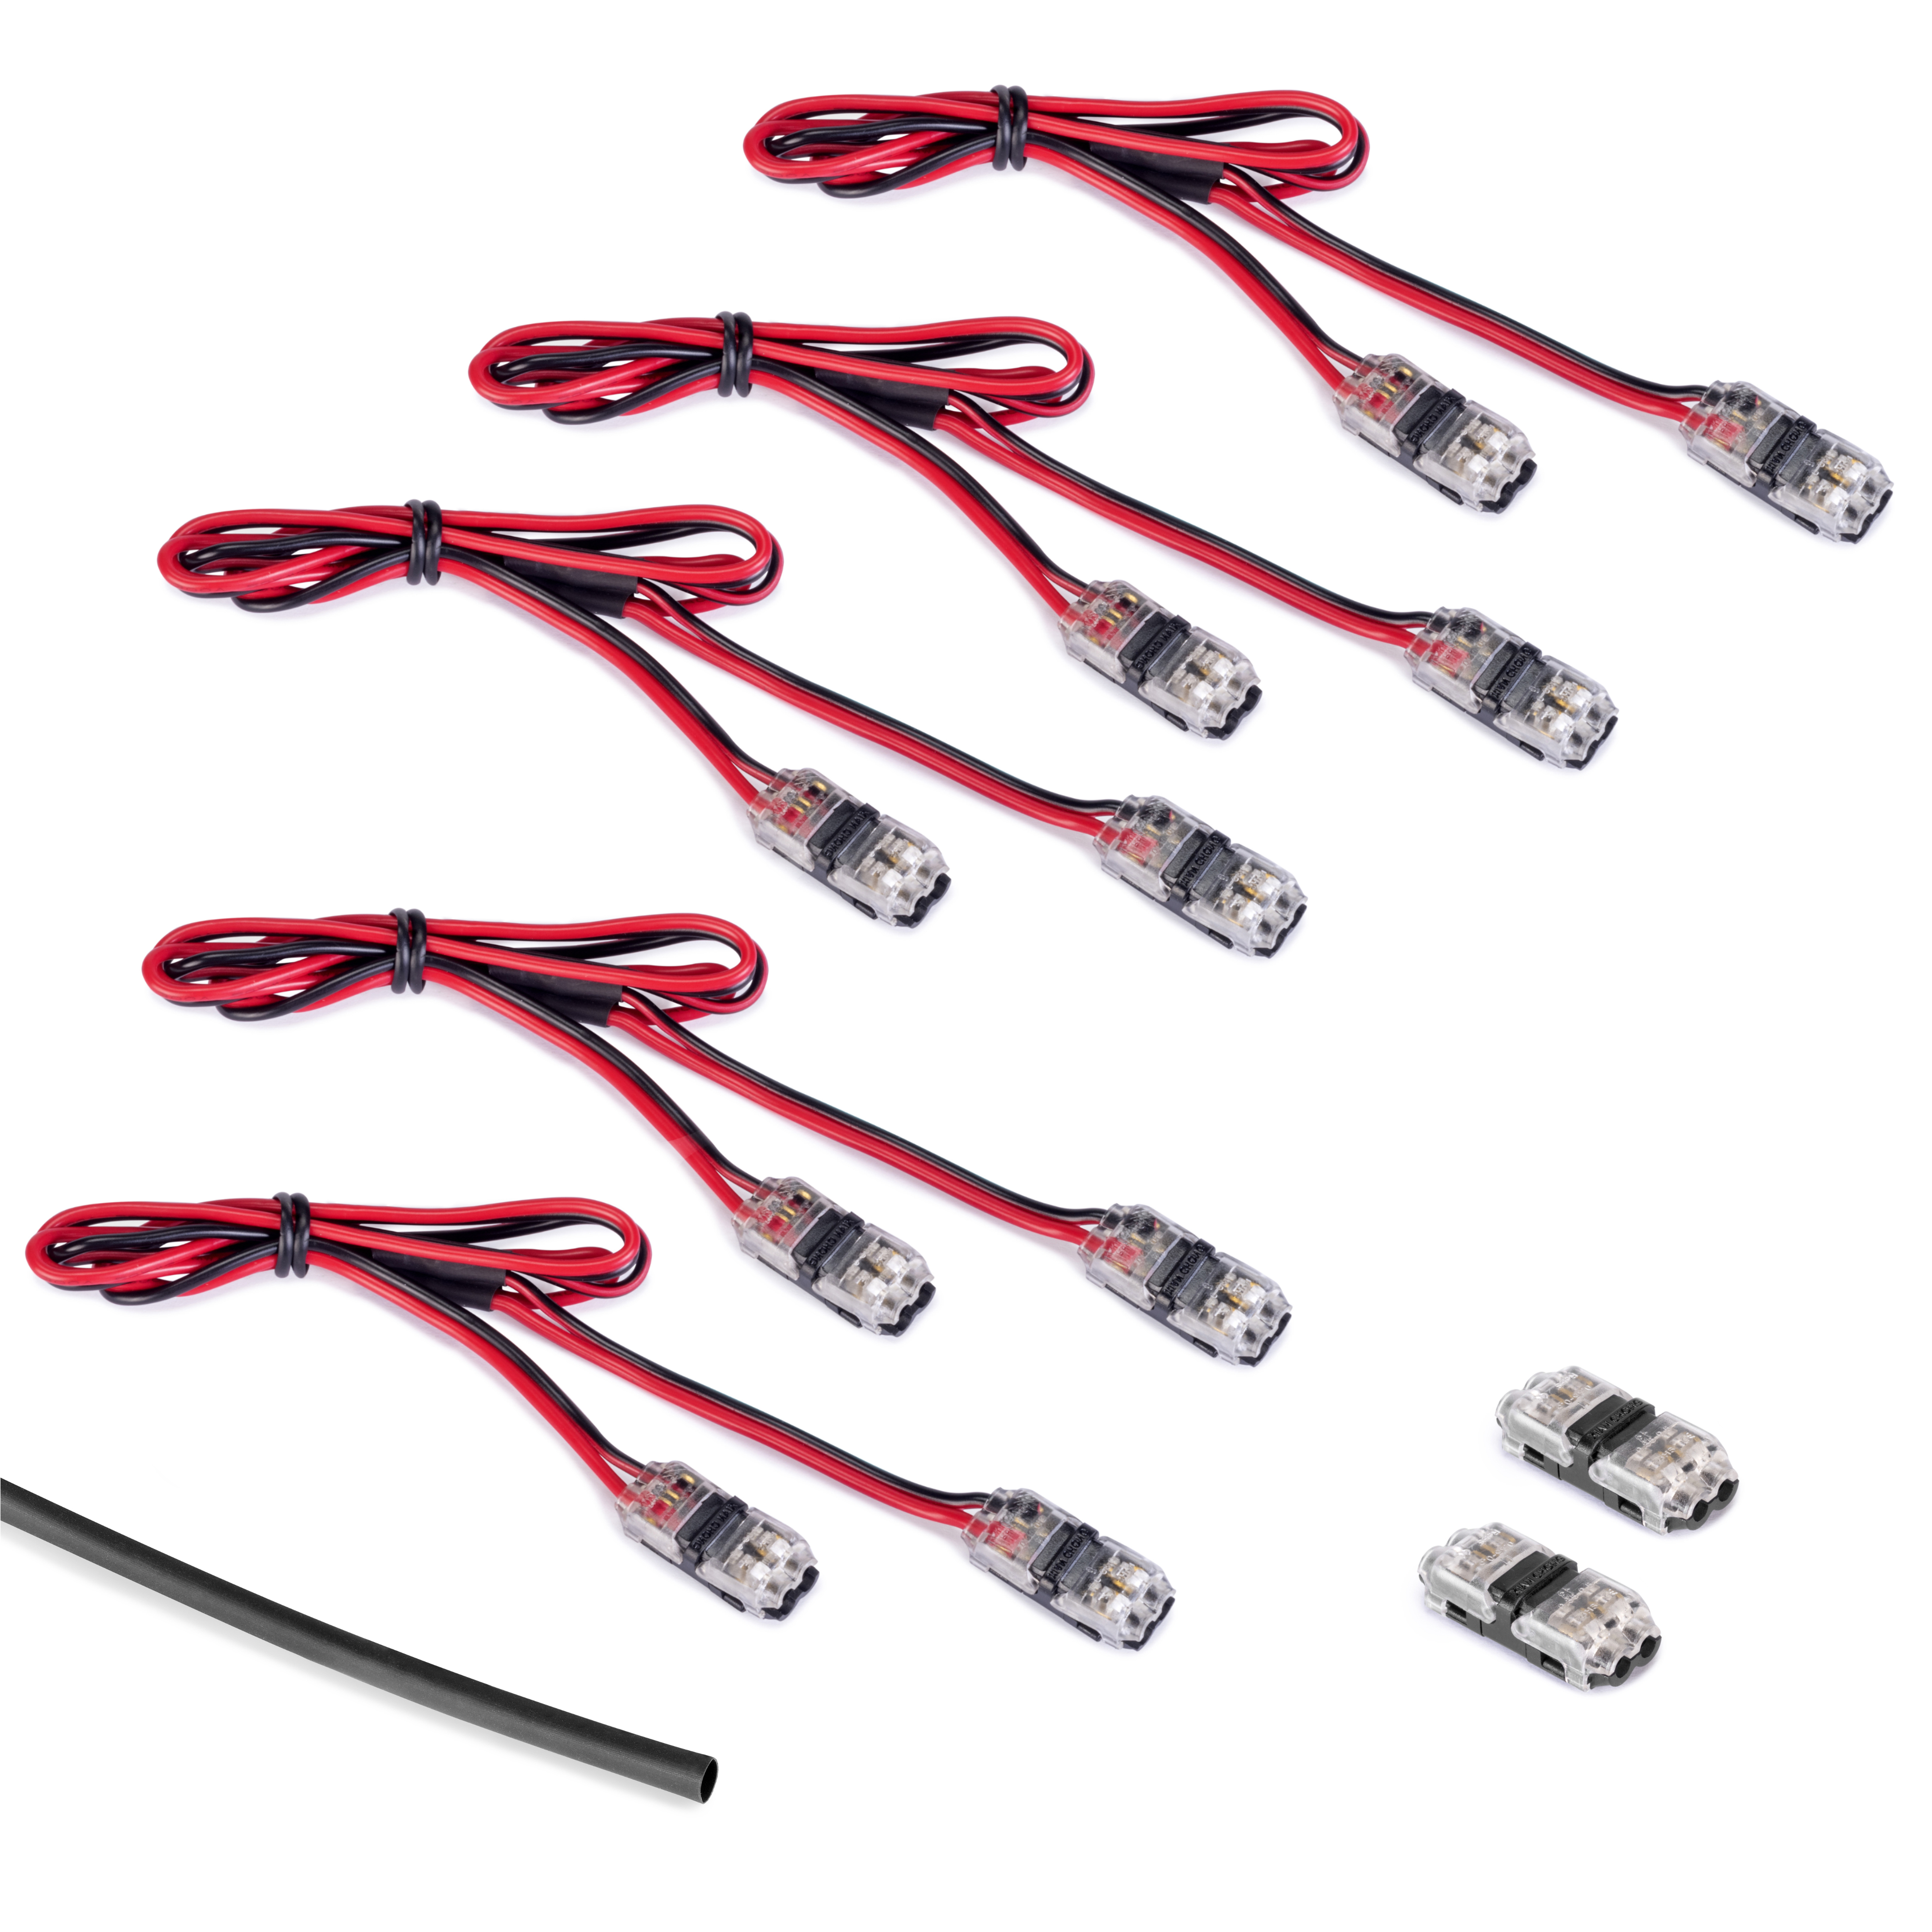 Kit of cables and connectors for lighting Zero structure, length 